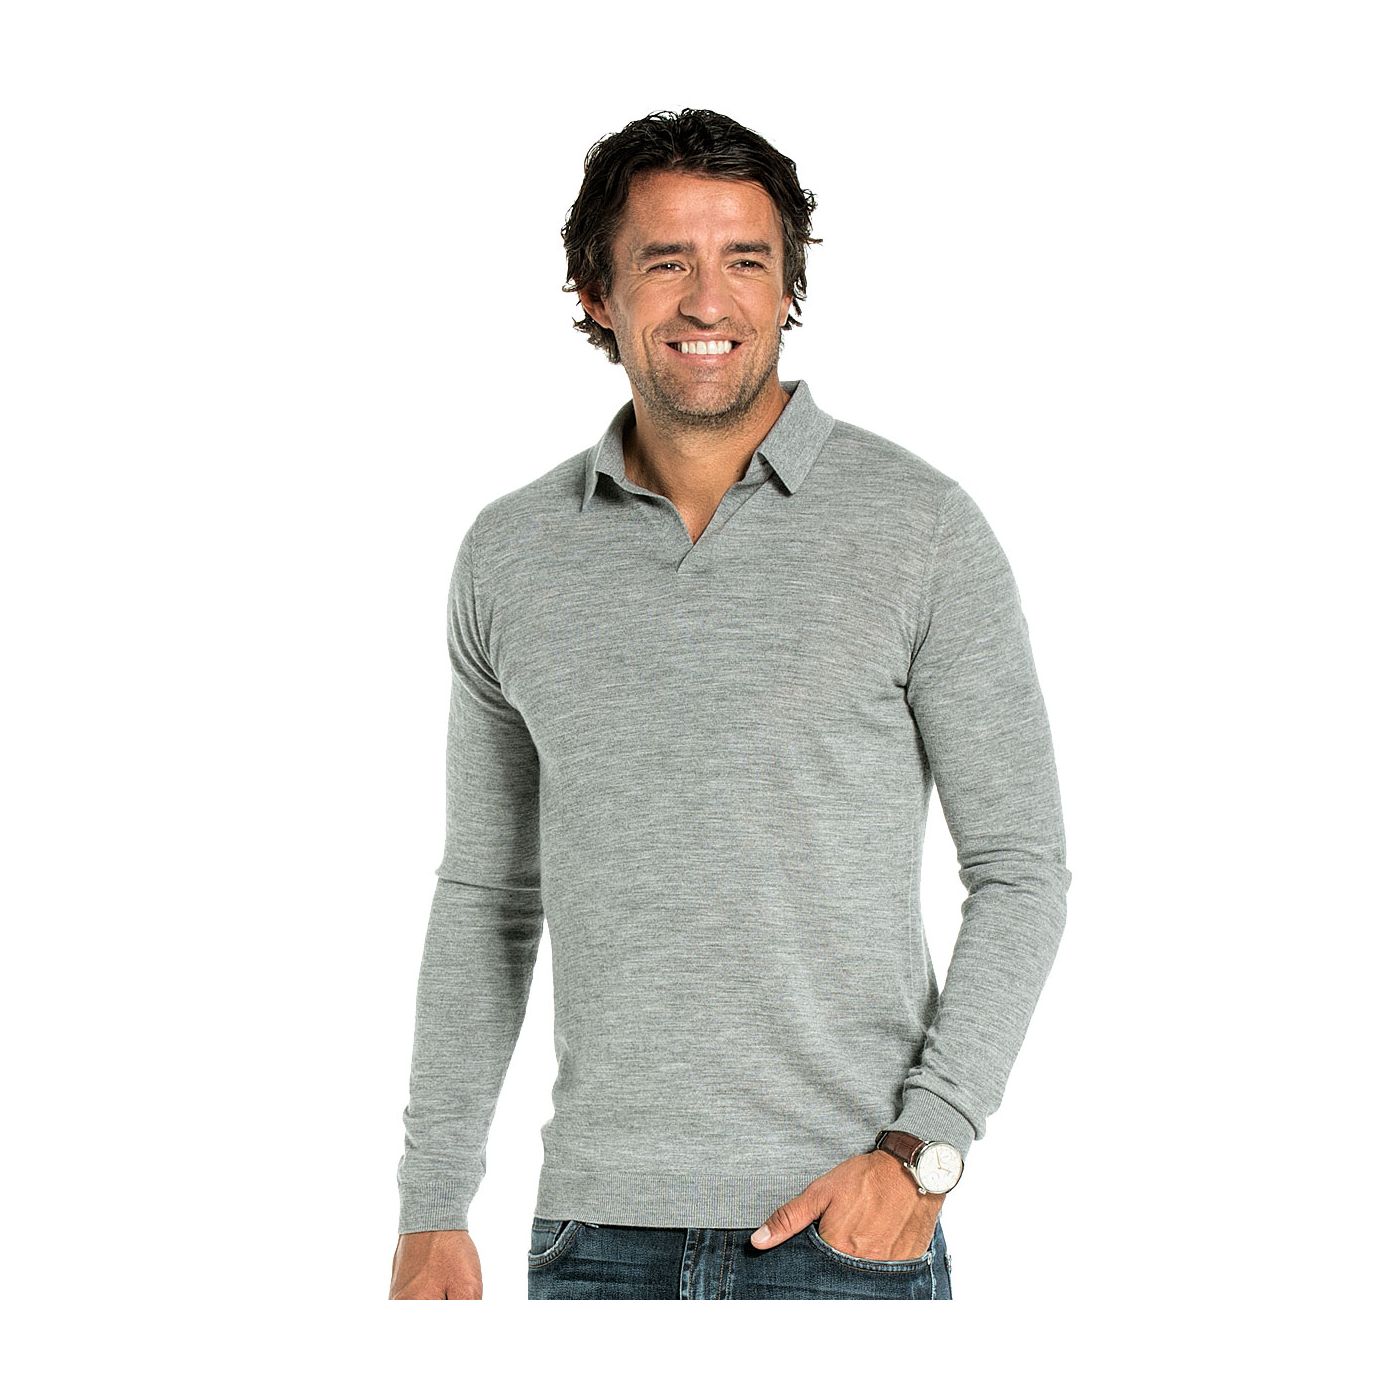 Polo long sleeve without buttons for men made of Merino wool in Grey